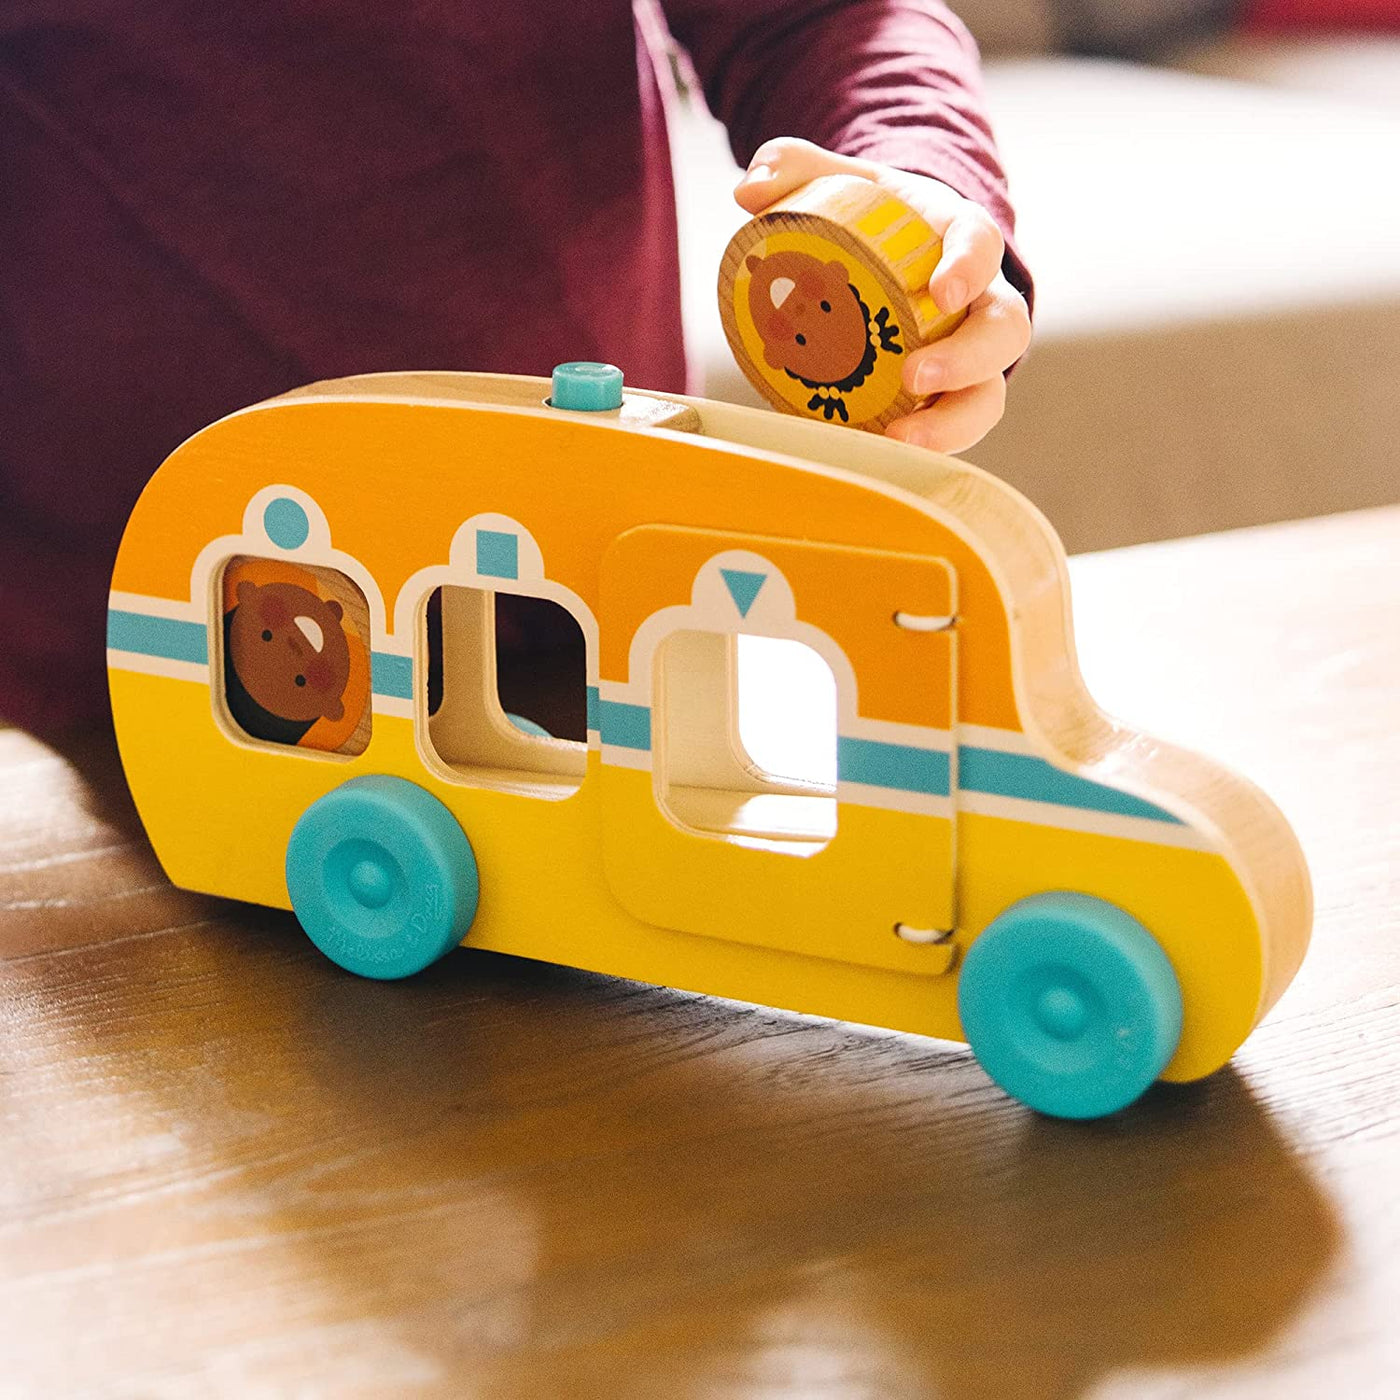 Earthlets.com| Melissa & Doug GO Tots Wooden Race Cars(2 Cars) with Collectible Characters | Wooden Toy for Infants | Developmental Toy for Toddlers | 0+ | Gift for Baby Boys or Baby Girls | FSC-Certified Materials | Earthlets.com |  